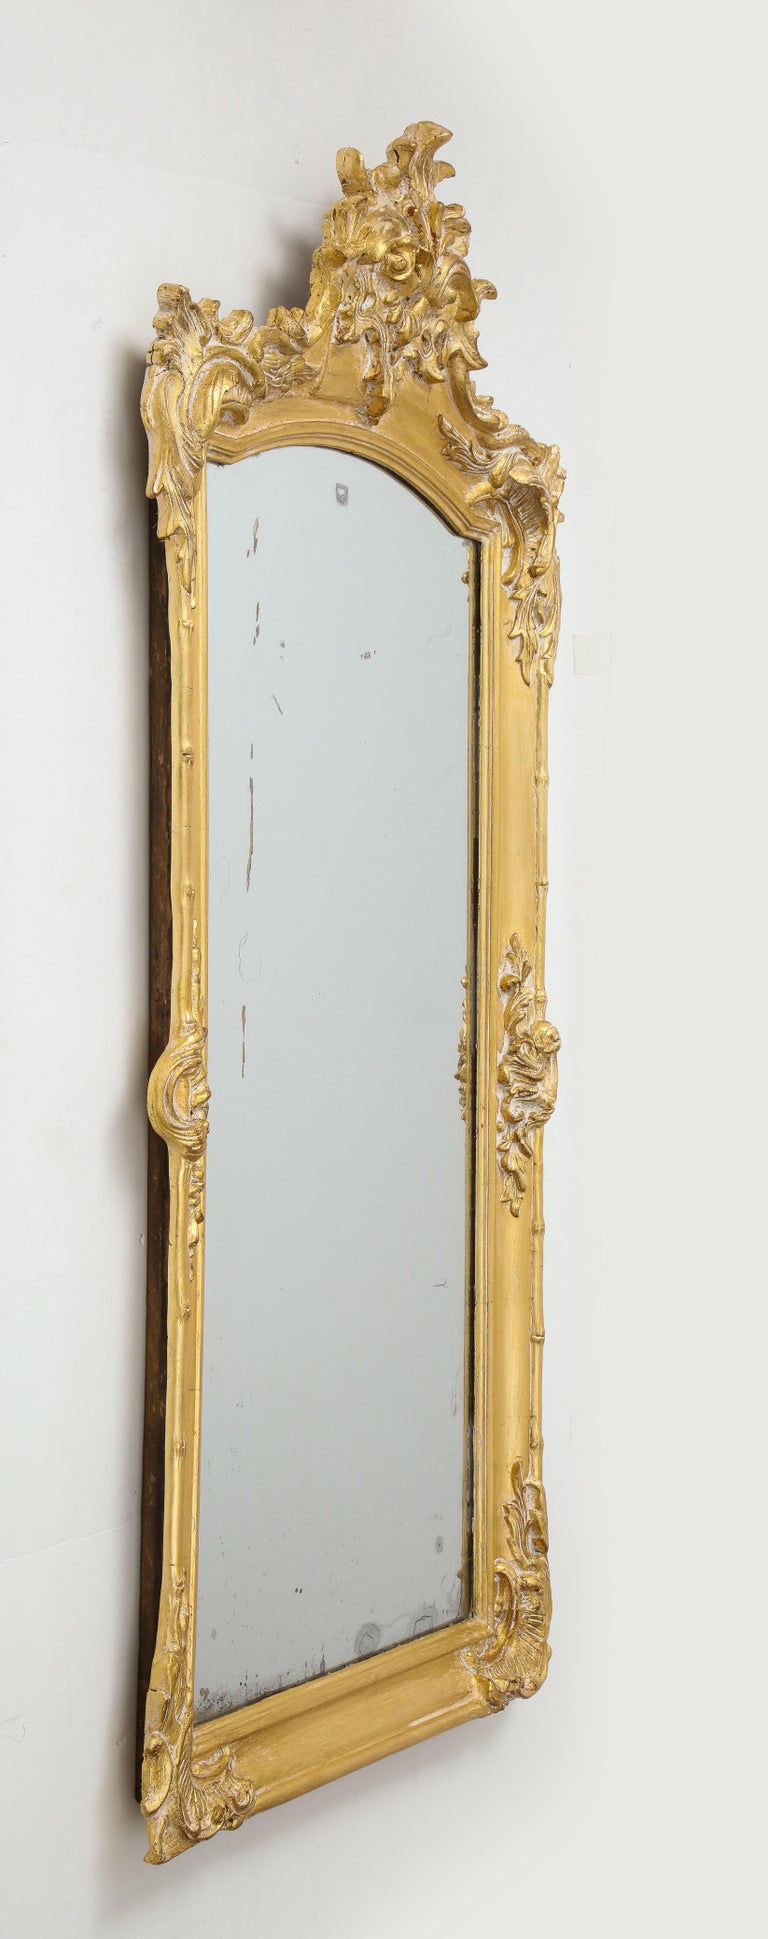 Fanciful French 19th century carved and gilded framed mirror depting stylized bamboo and leaf motif. Original aged mercury glass mirror inset.